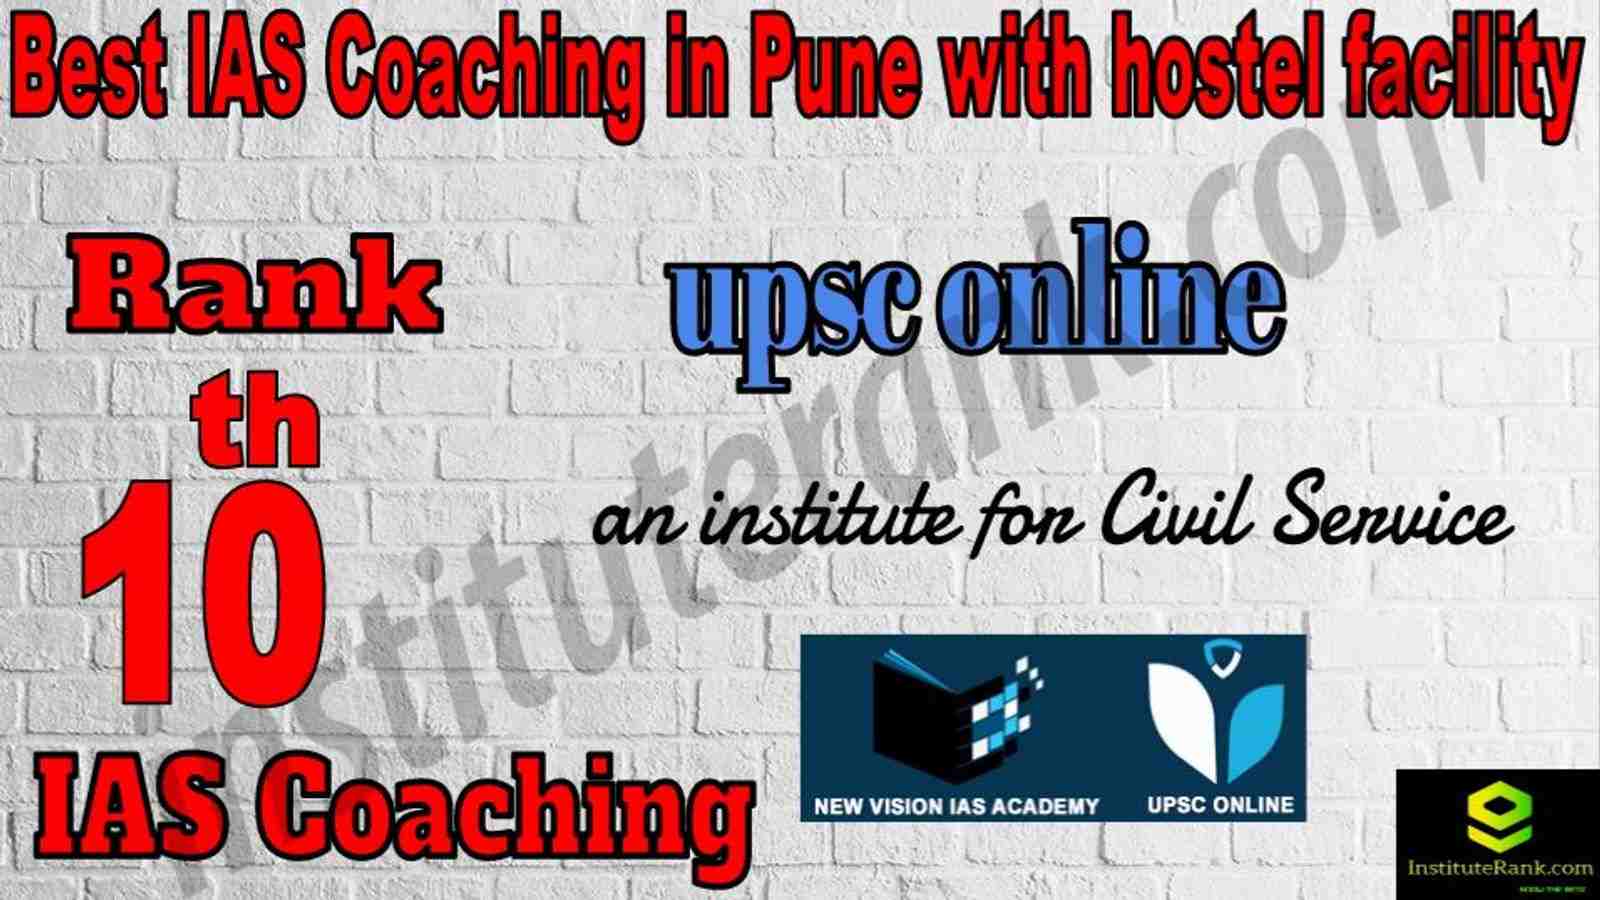 10th Best IAS Coaching in Pune with hostel facility